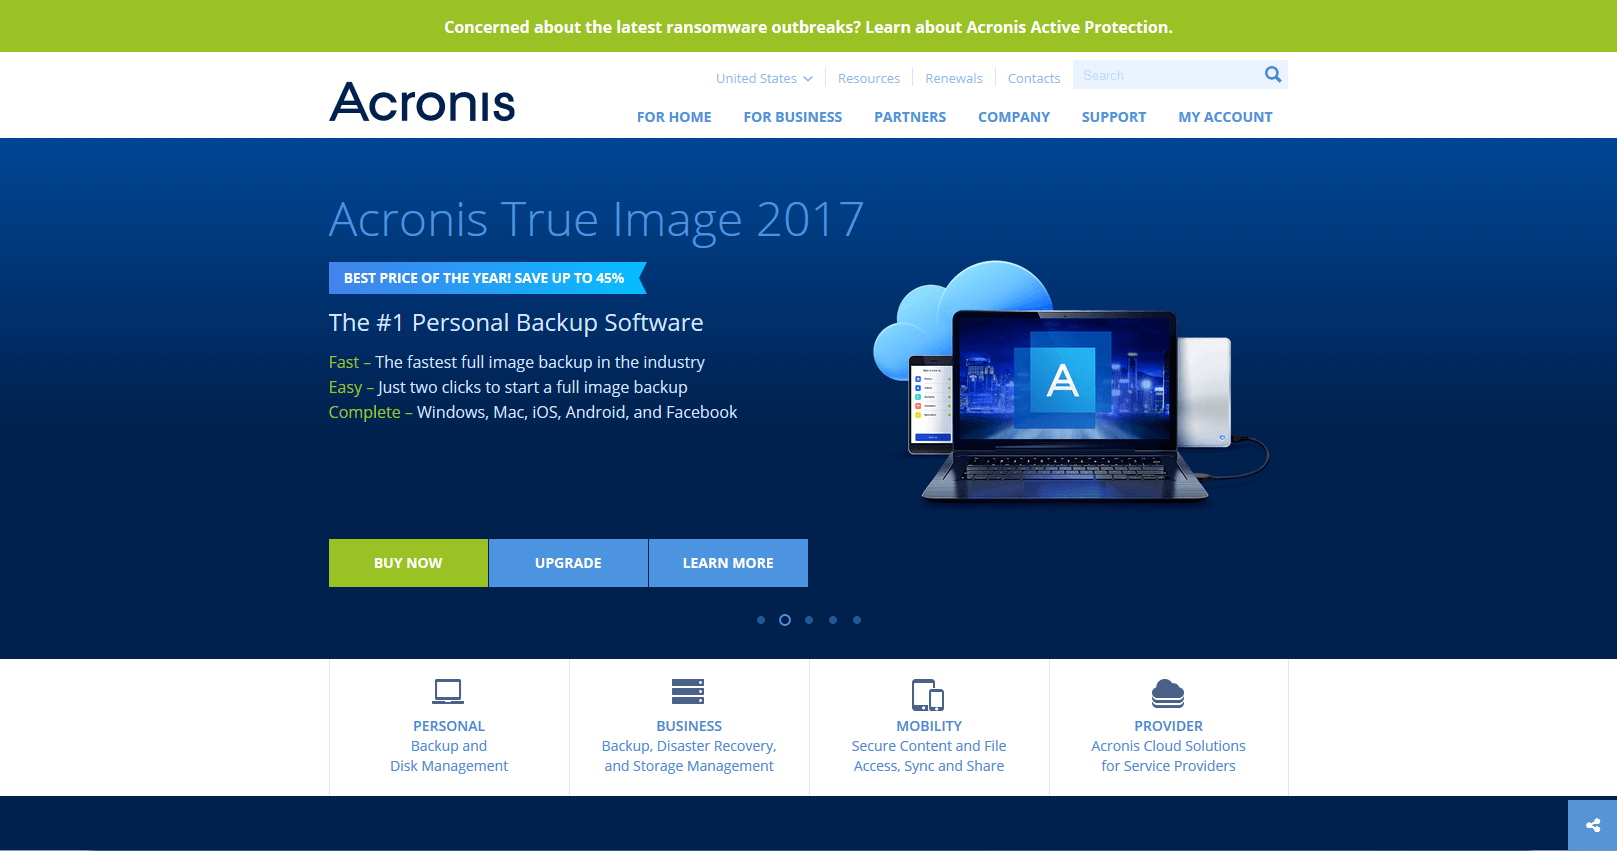 Variety is the New Gold Standard with Acronis-Google Storage Option